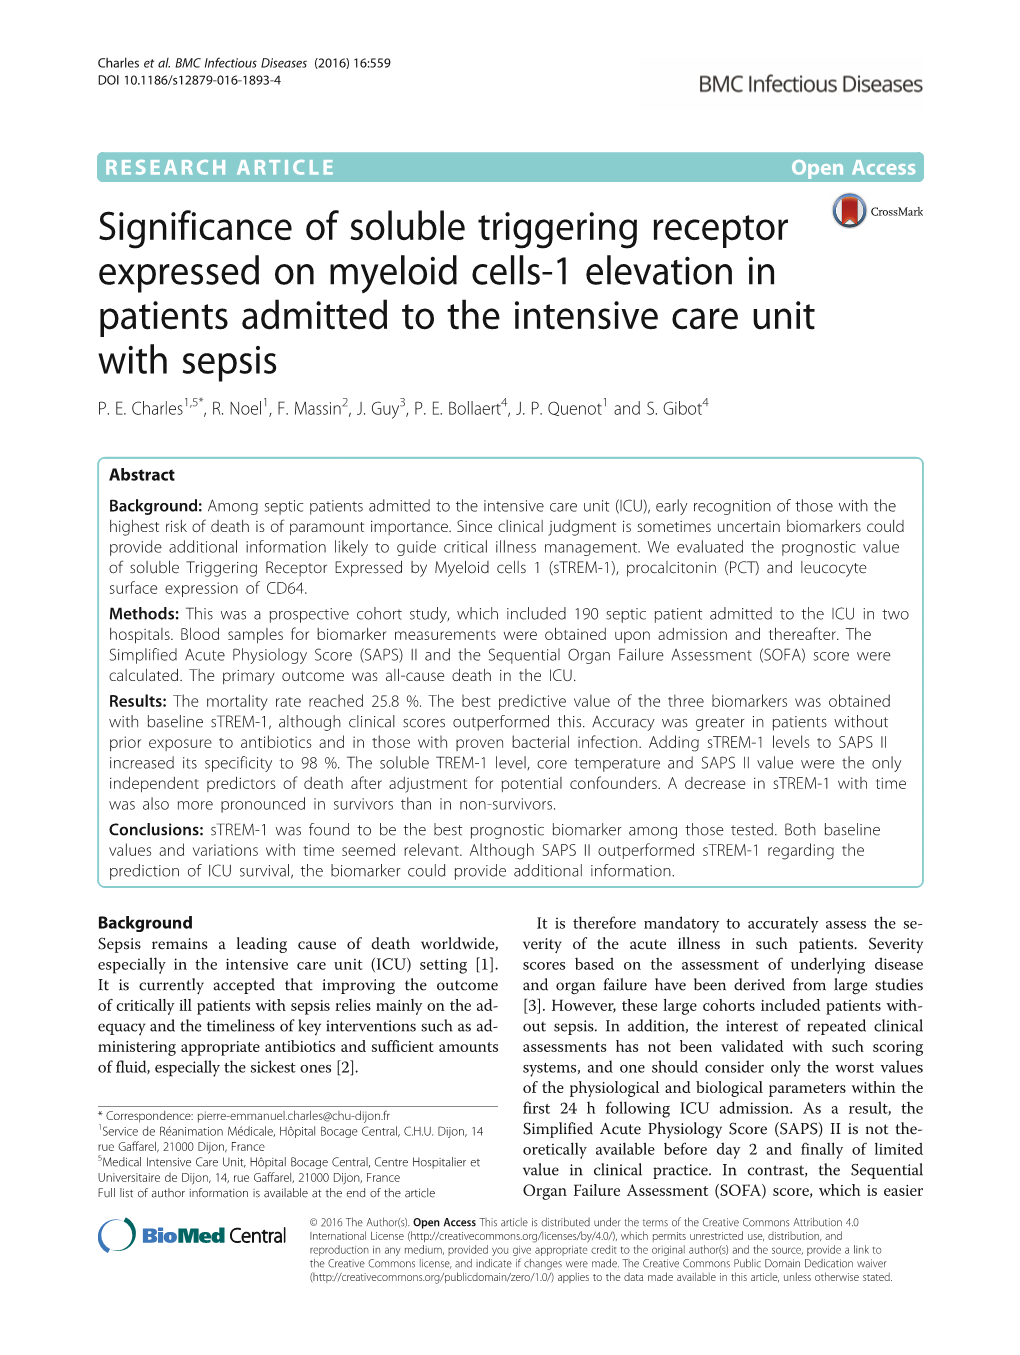 Significance of Soluble Triggering Receptor Expressed on Myeloid Cells-1 Elevation in Patients Admitted to the Intensive Care Unit with Sepsis P